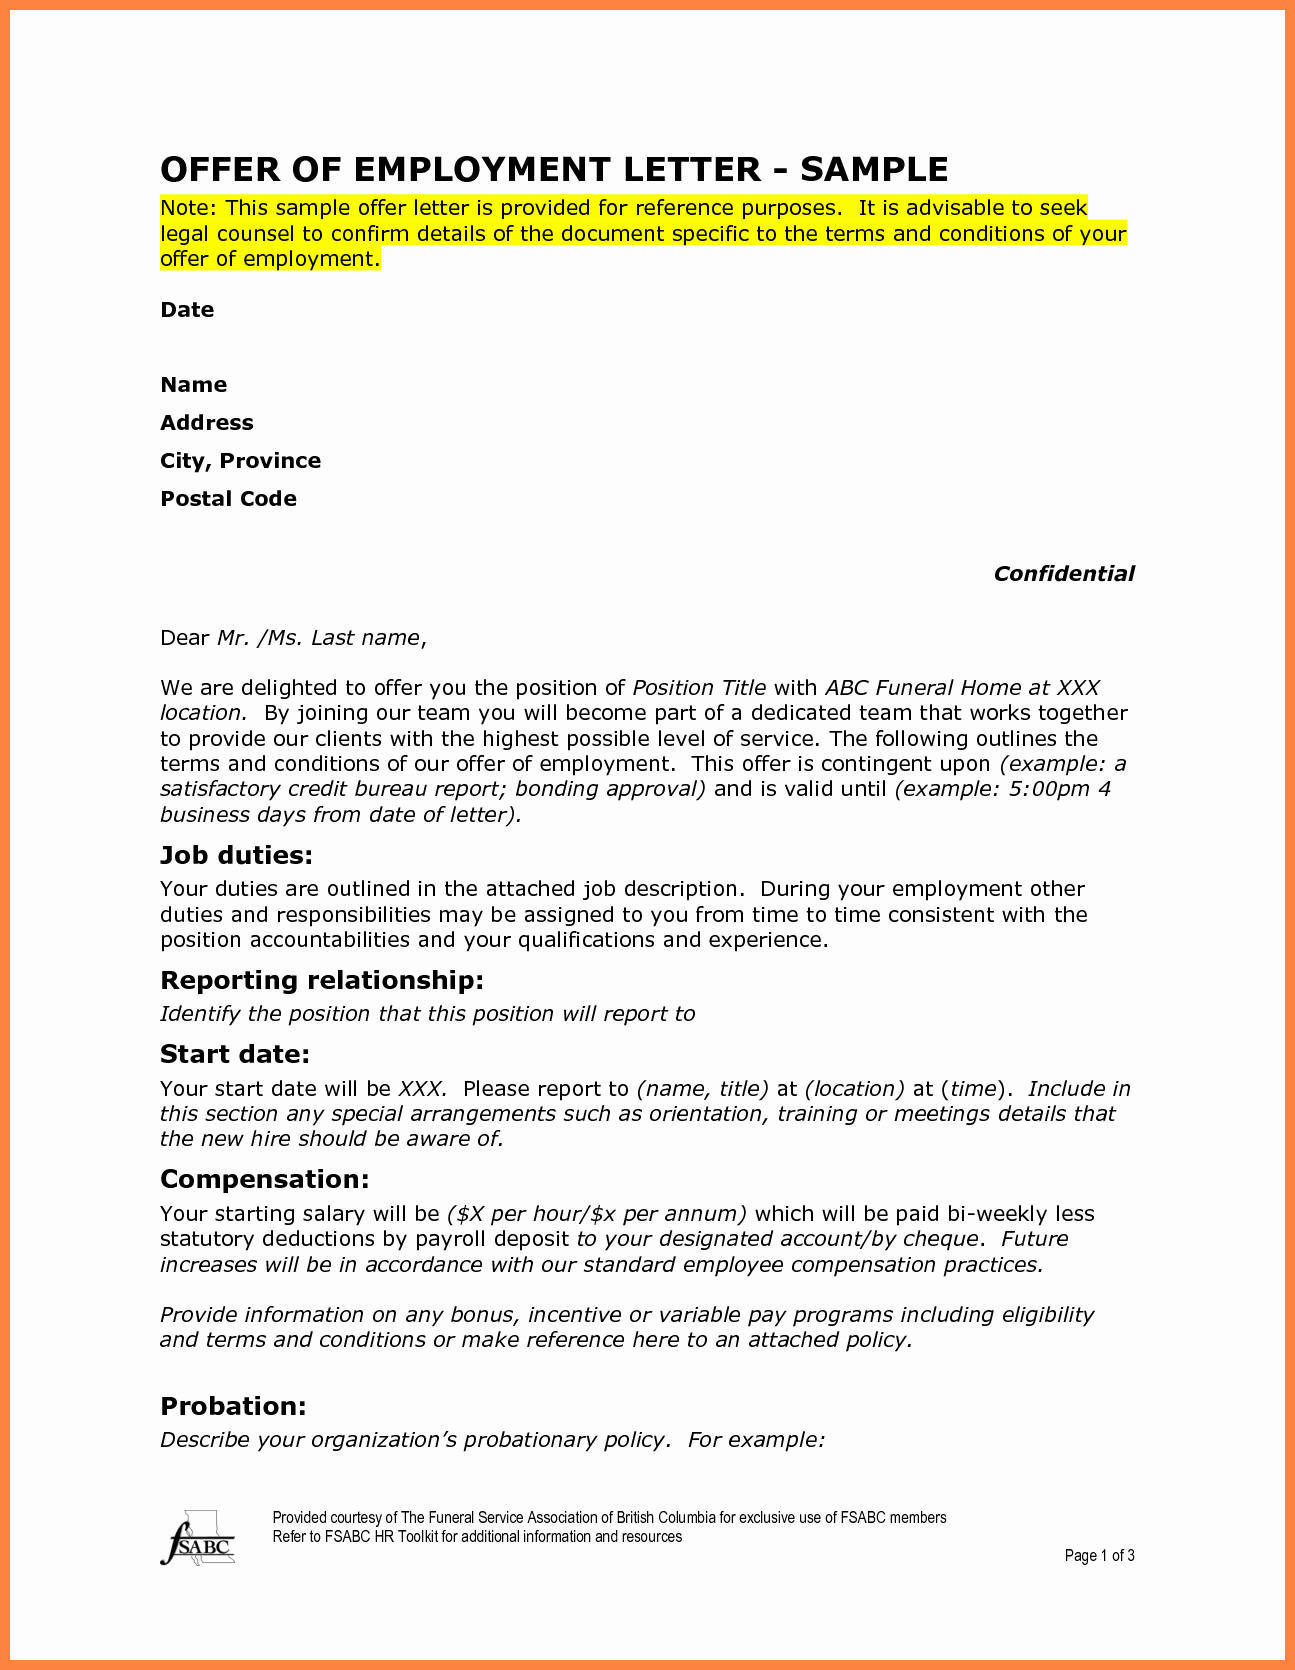 Letter Of Employment Templates Lovely 10 Offer Of Employment Letter